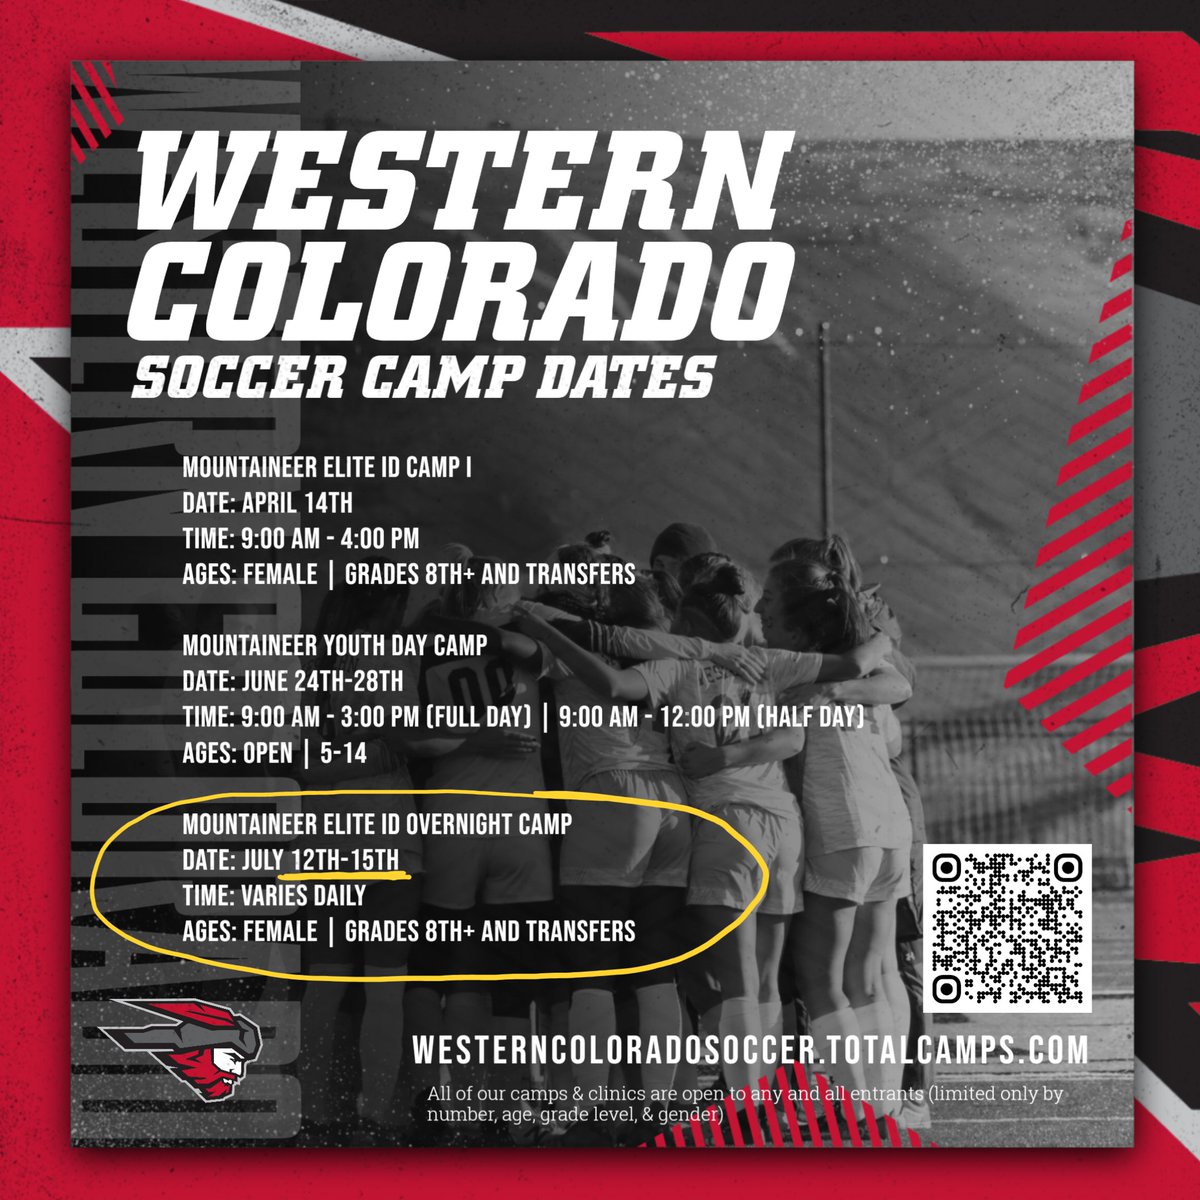 Hi! It's been brought to our attention that we posted the wrong dates for our Mountaineer Elite ID Overnight Camp...the correct dates are July 12th-15th. Admin sends deep apologies! Hope to see you there!! #elevated #7723ft